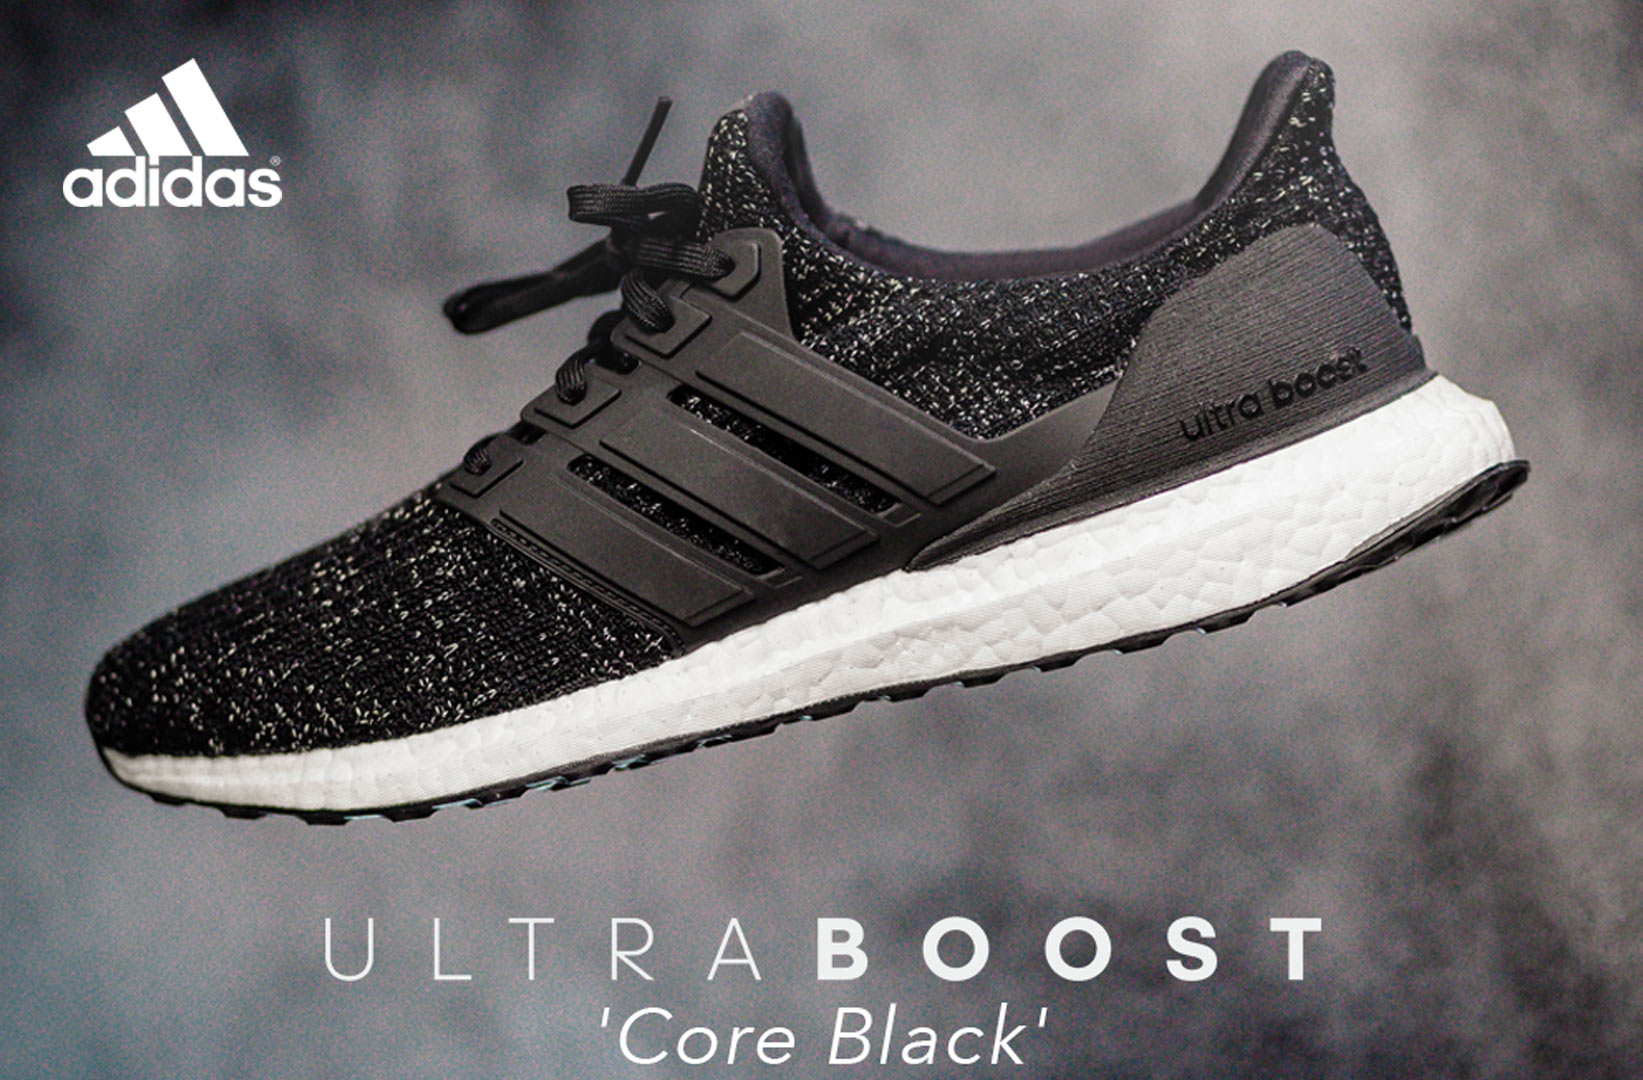 Adidas Ultra Boost Black and White: Perfect for Any Outfit, Any Time